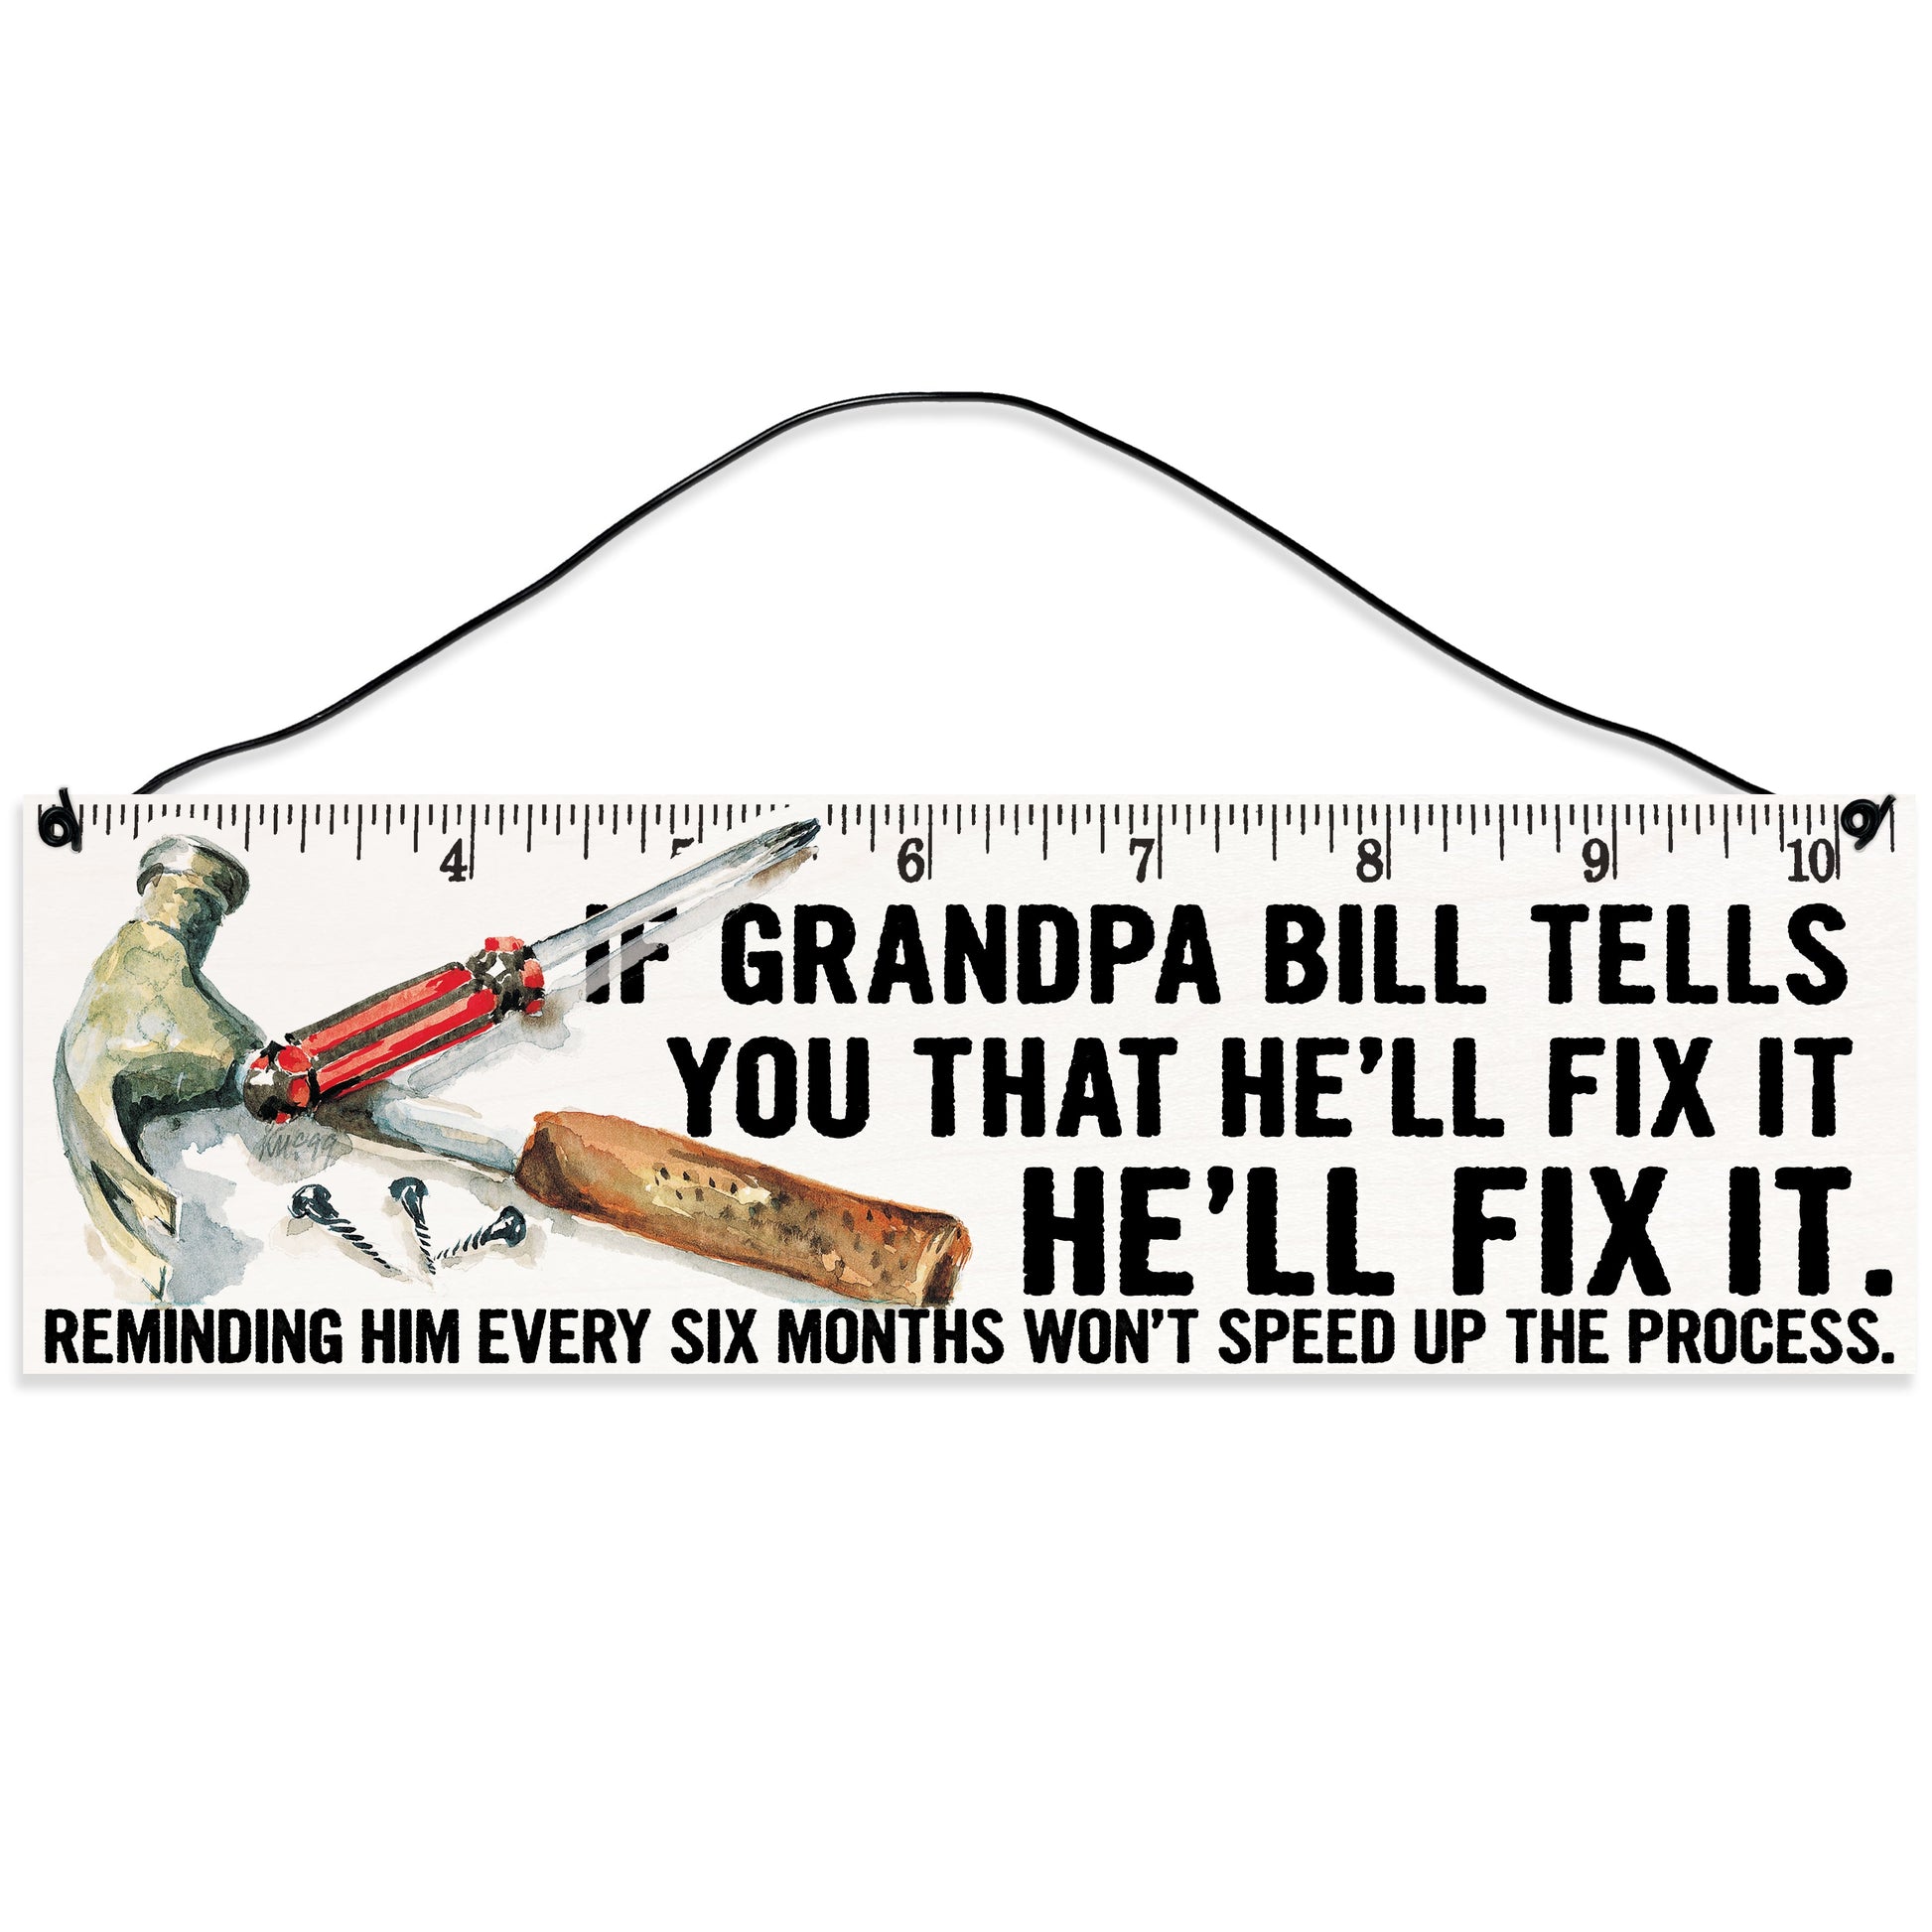 Sawyer's Mill - If a Man Tells You That He'll Fix It, He'll Fix It. Wood Sign for Home or Office. Measures 3x10 inches.